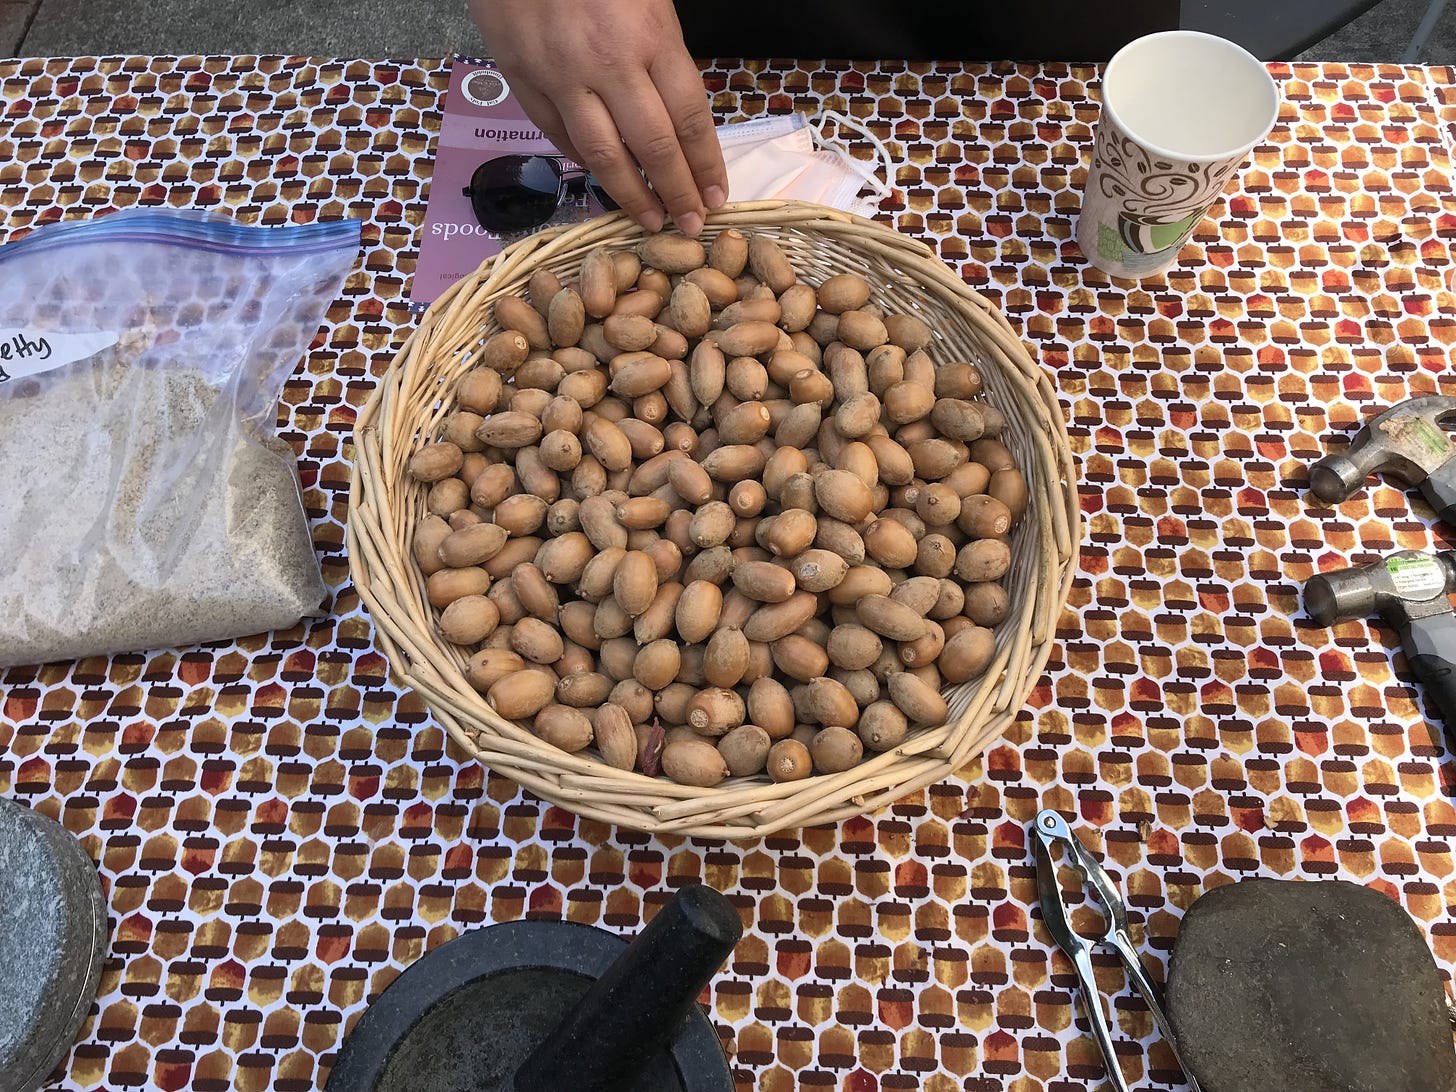 Photo by Krisanne Keiser | Basket of acorns at one of the Indigenous Food Festival tables on April 16.